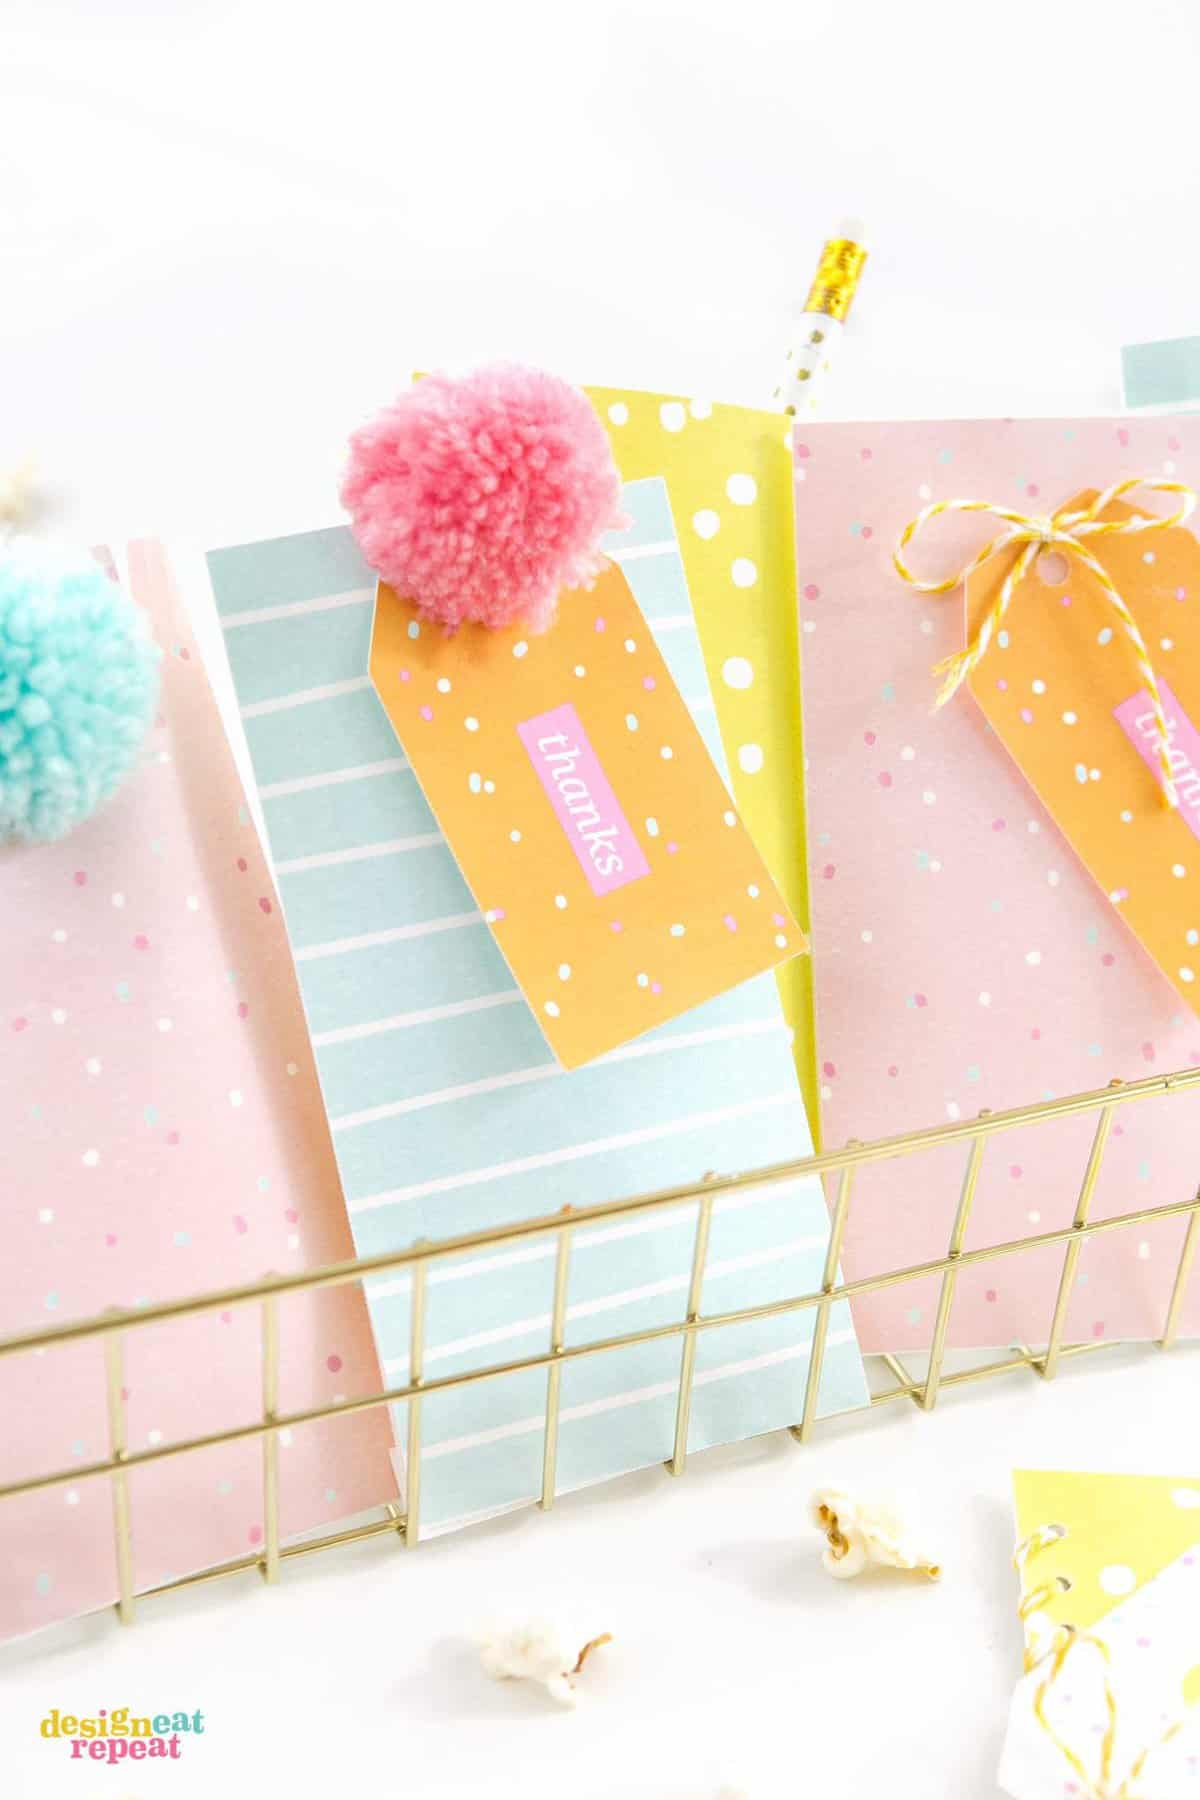 Download these fun & colorful printable birthday gift tags and attach them to treat bags for an easy party favor idea!